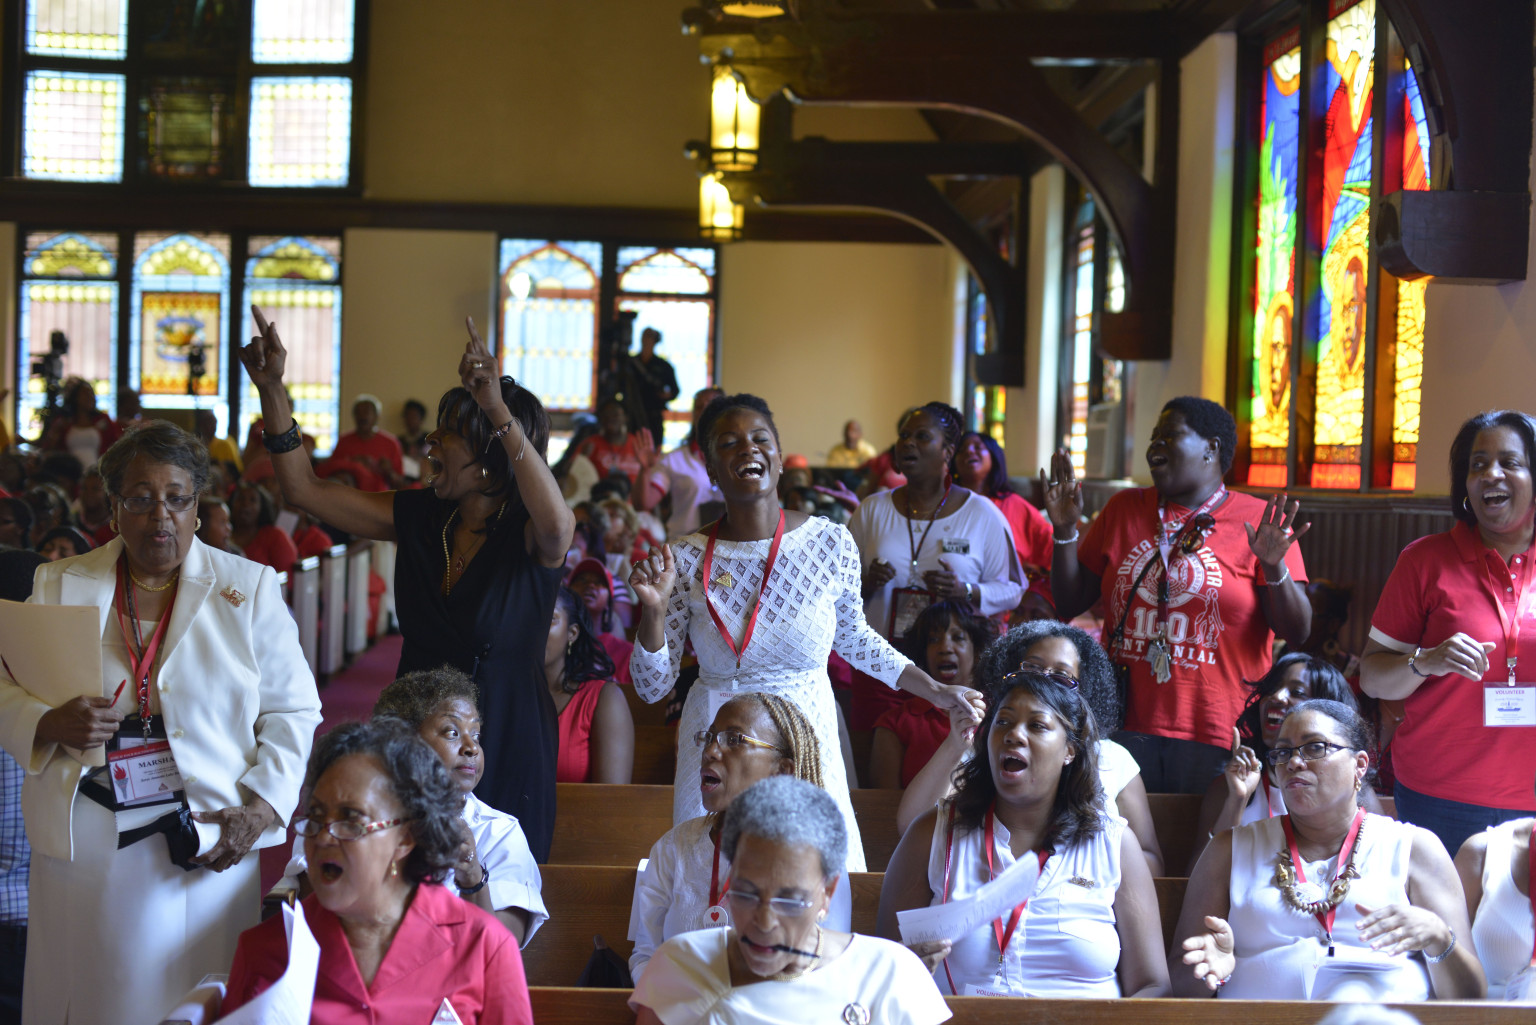 Delta Sigma Theta 100 Convention Descends Upon DC, Aims To Beat AKA